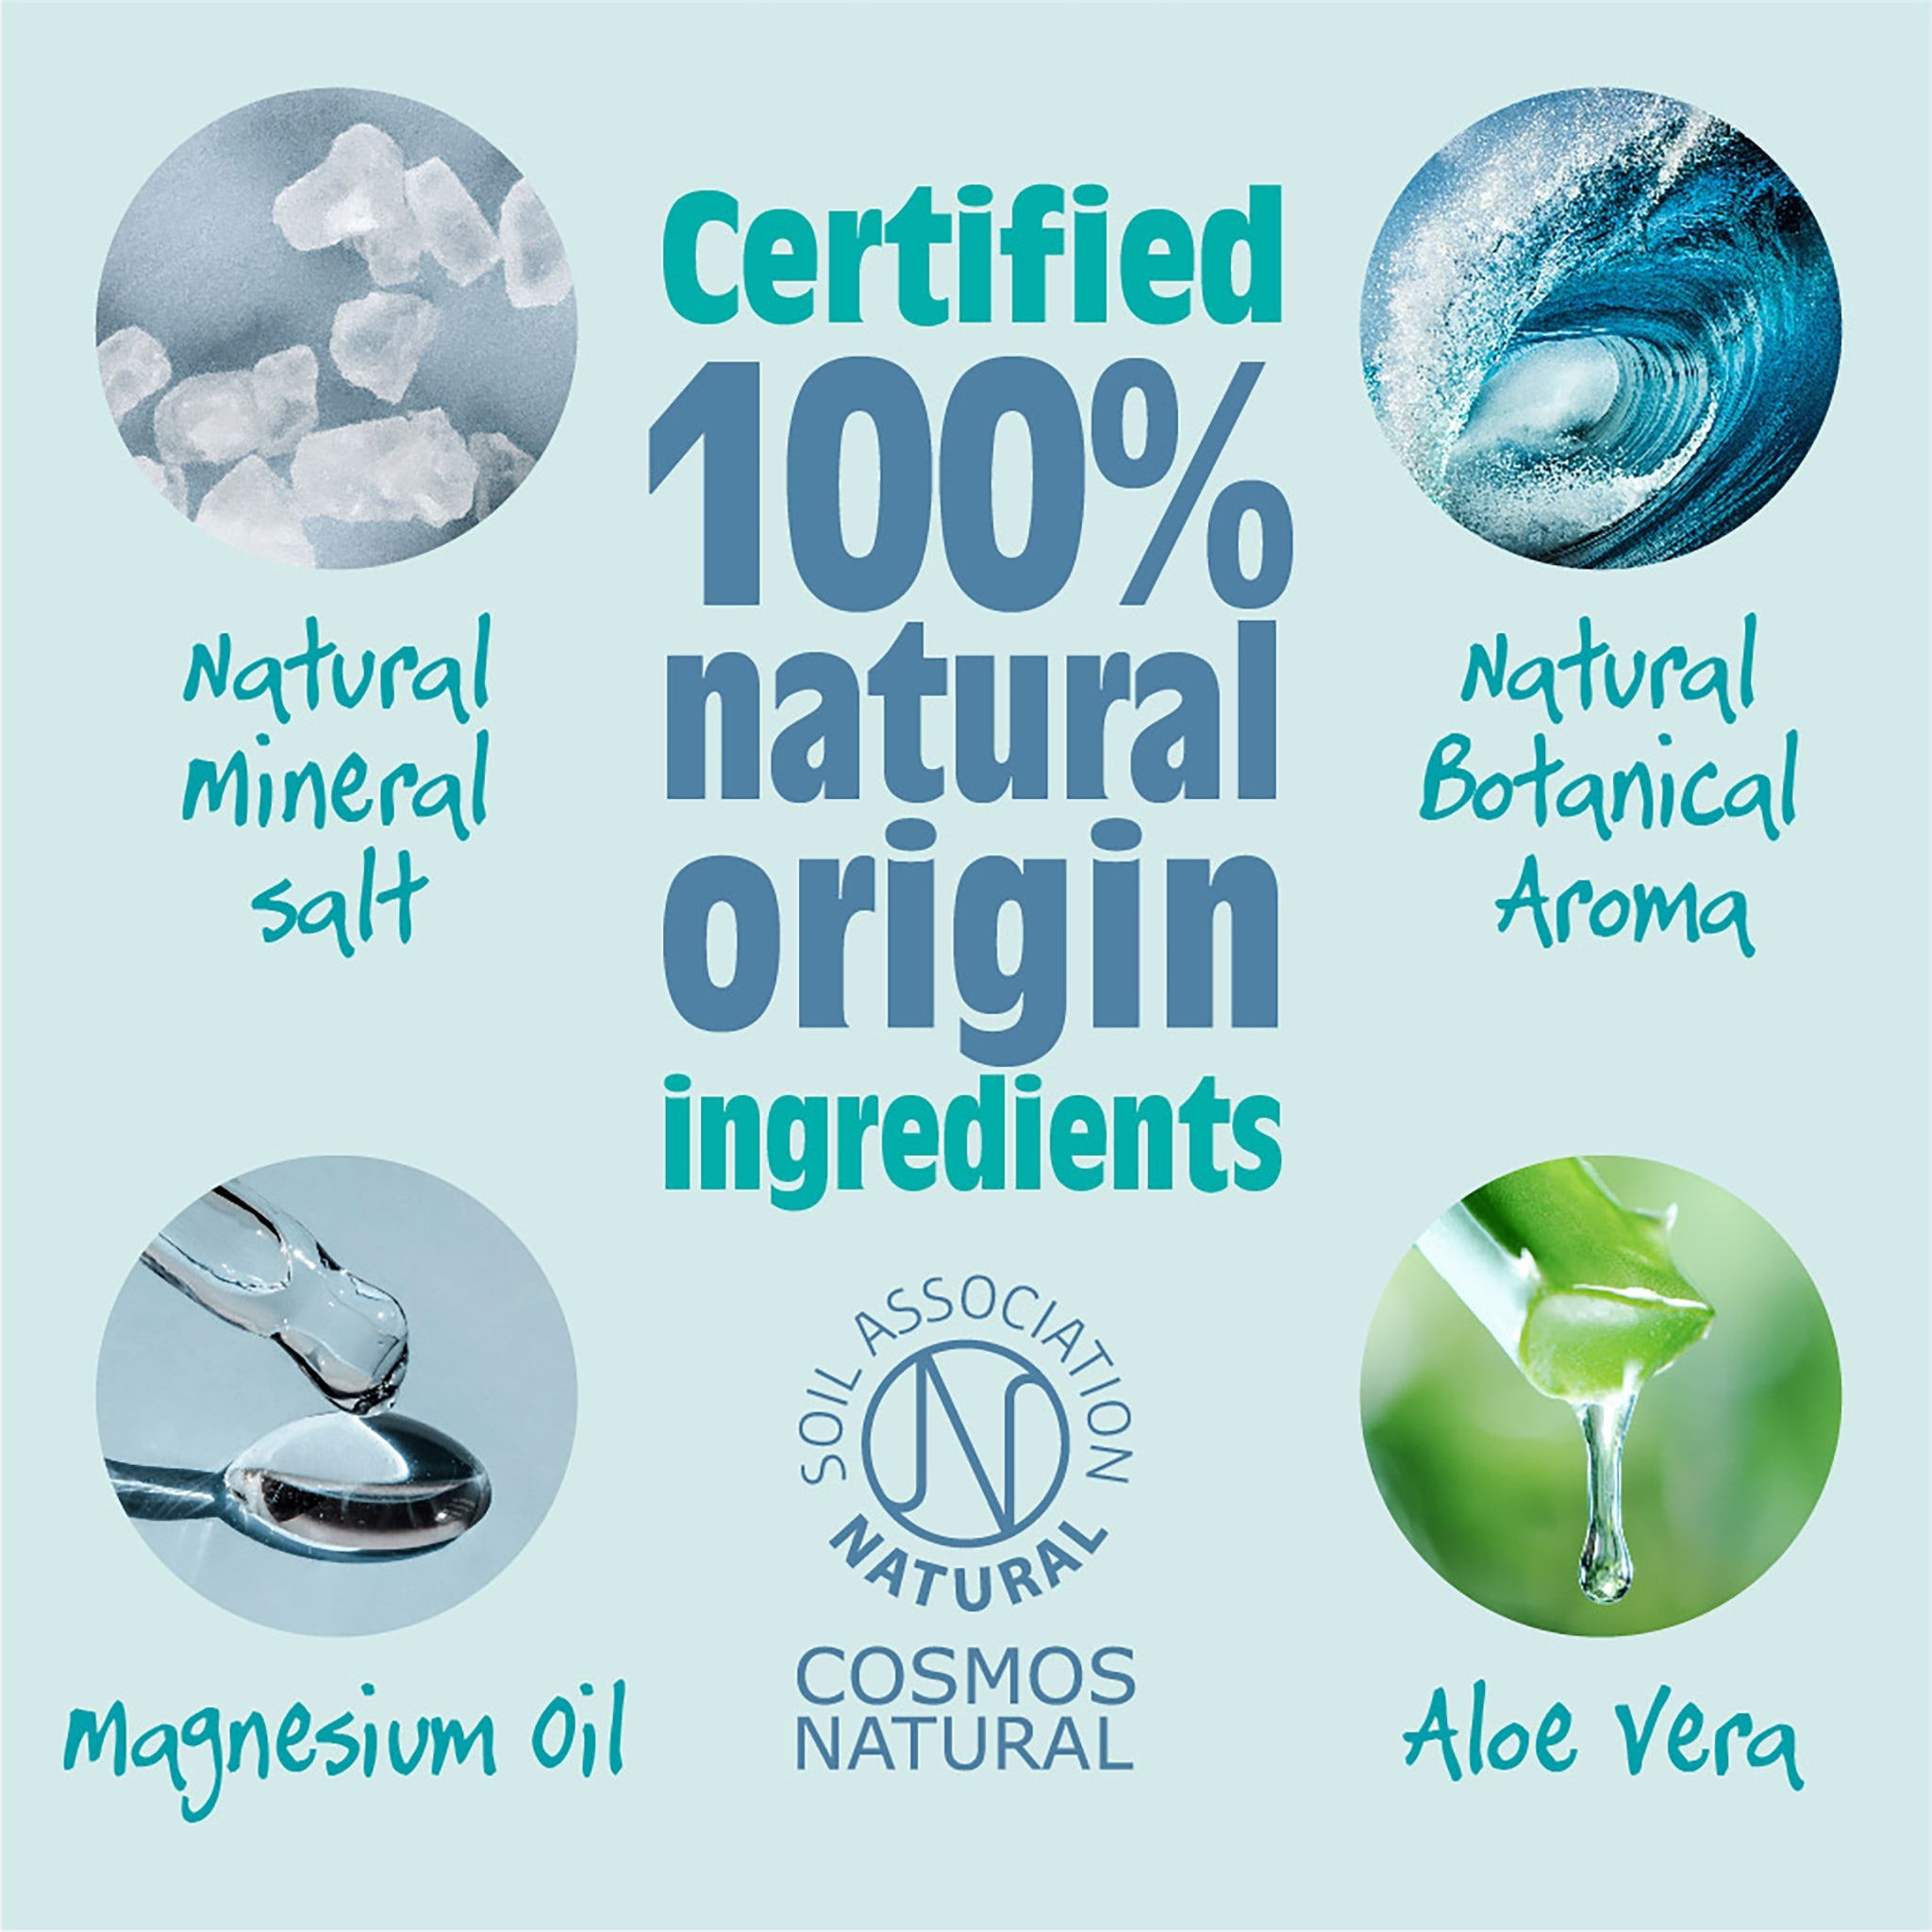 Natural Deodorant Roll-On Refill | Ocean & Coconut - mypure.co.uk